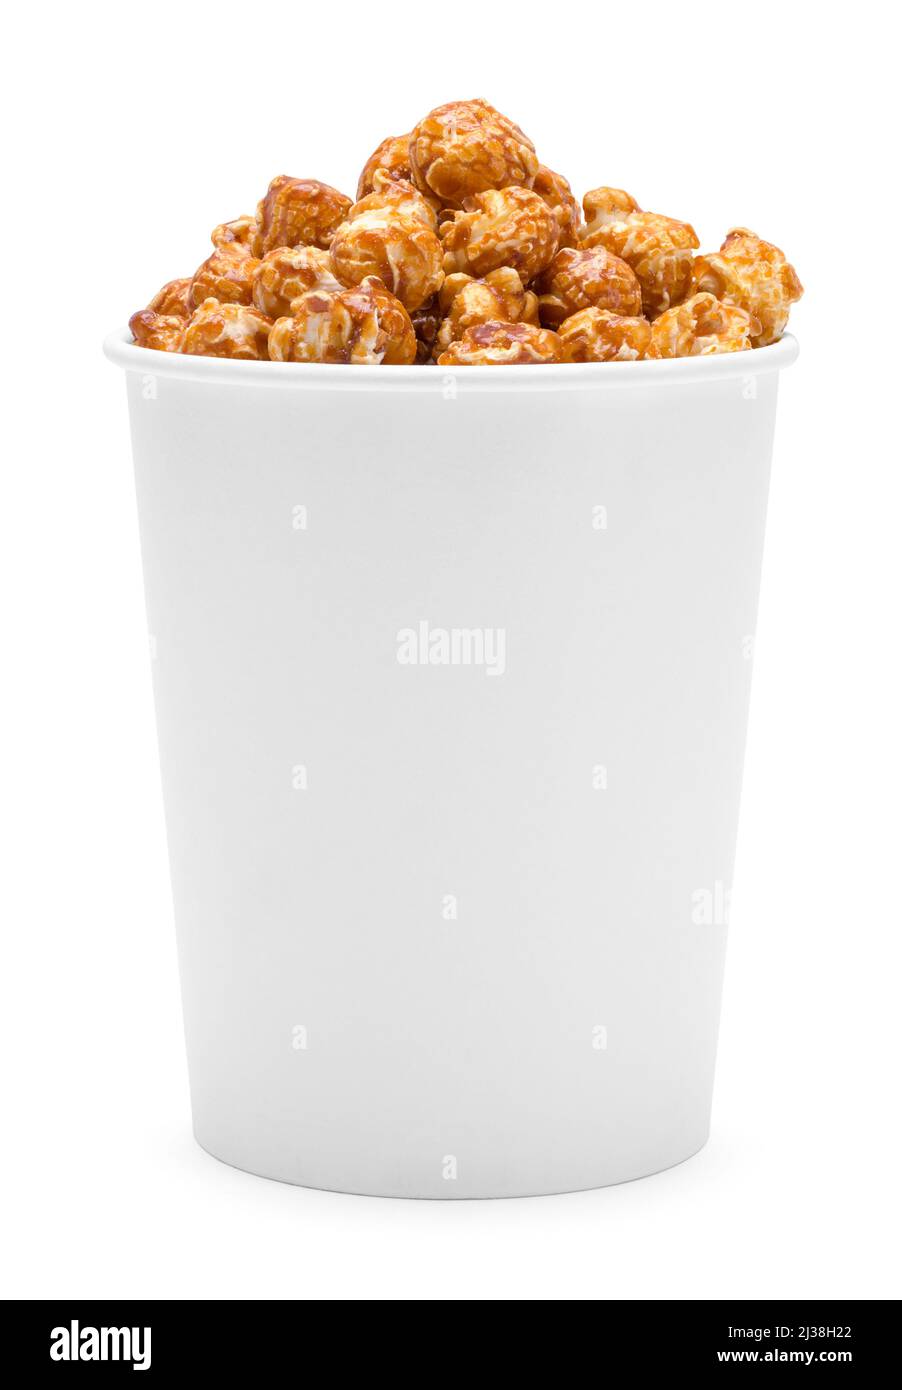 Bucket Tub of Caramel Corn Cut Out on White. Stock Photo